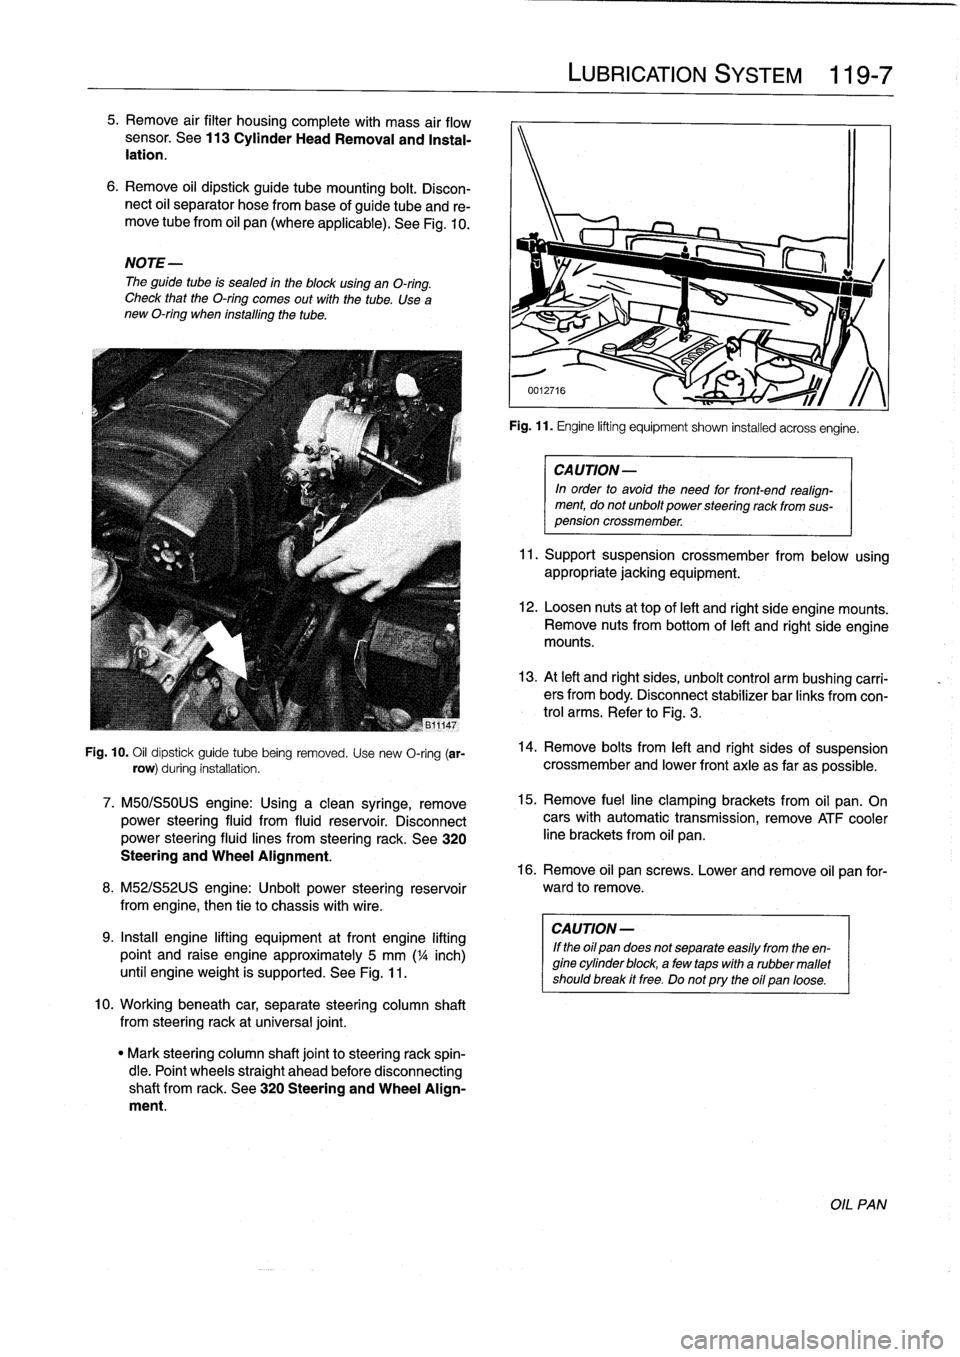 BMW 323i 1998 E36 Workshop Manual 
5
.
Remove
air
filter
housingcomplete
with
mass
air
flow
sensor
.
See113
Cylinder
HeadRemoval
and
Instal-
lation
.

6
.
Remove
oil
dipstick
guide
tube
mounting
bolt
.
Discon-
nect
oil
separator
hose
